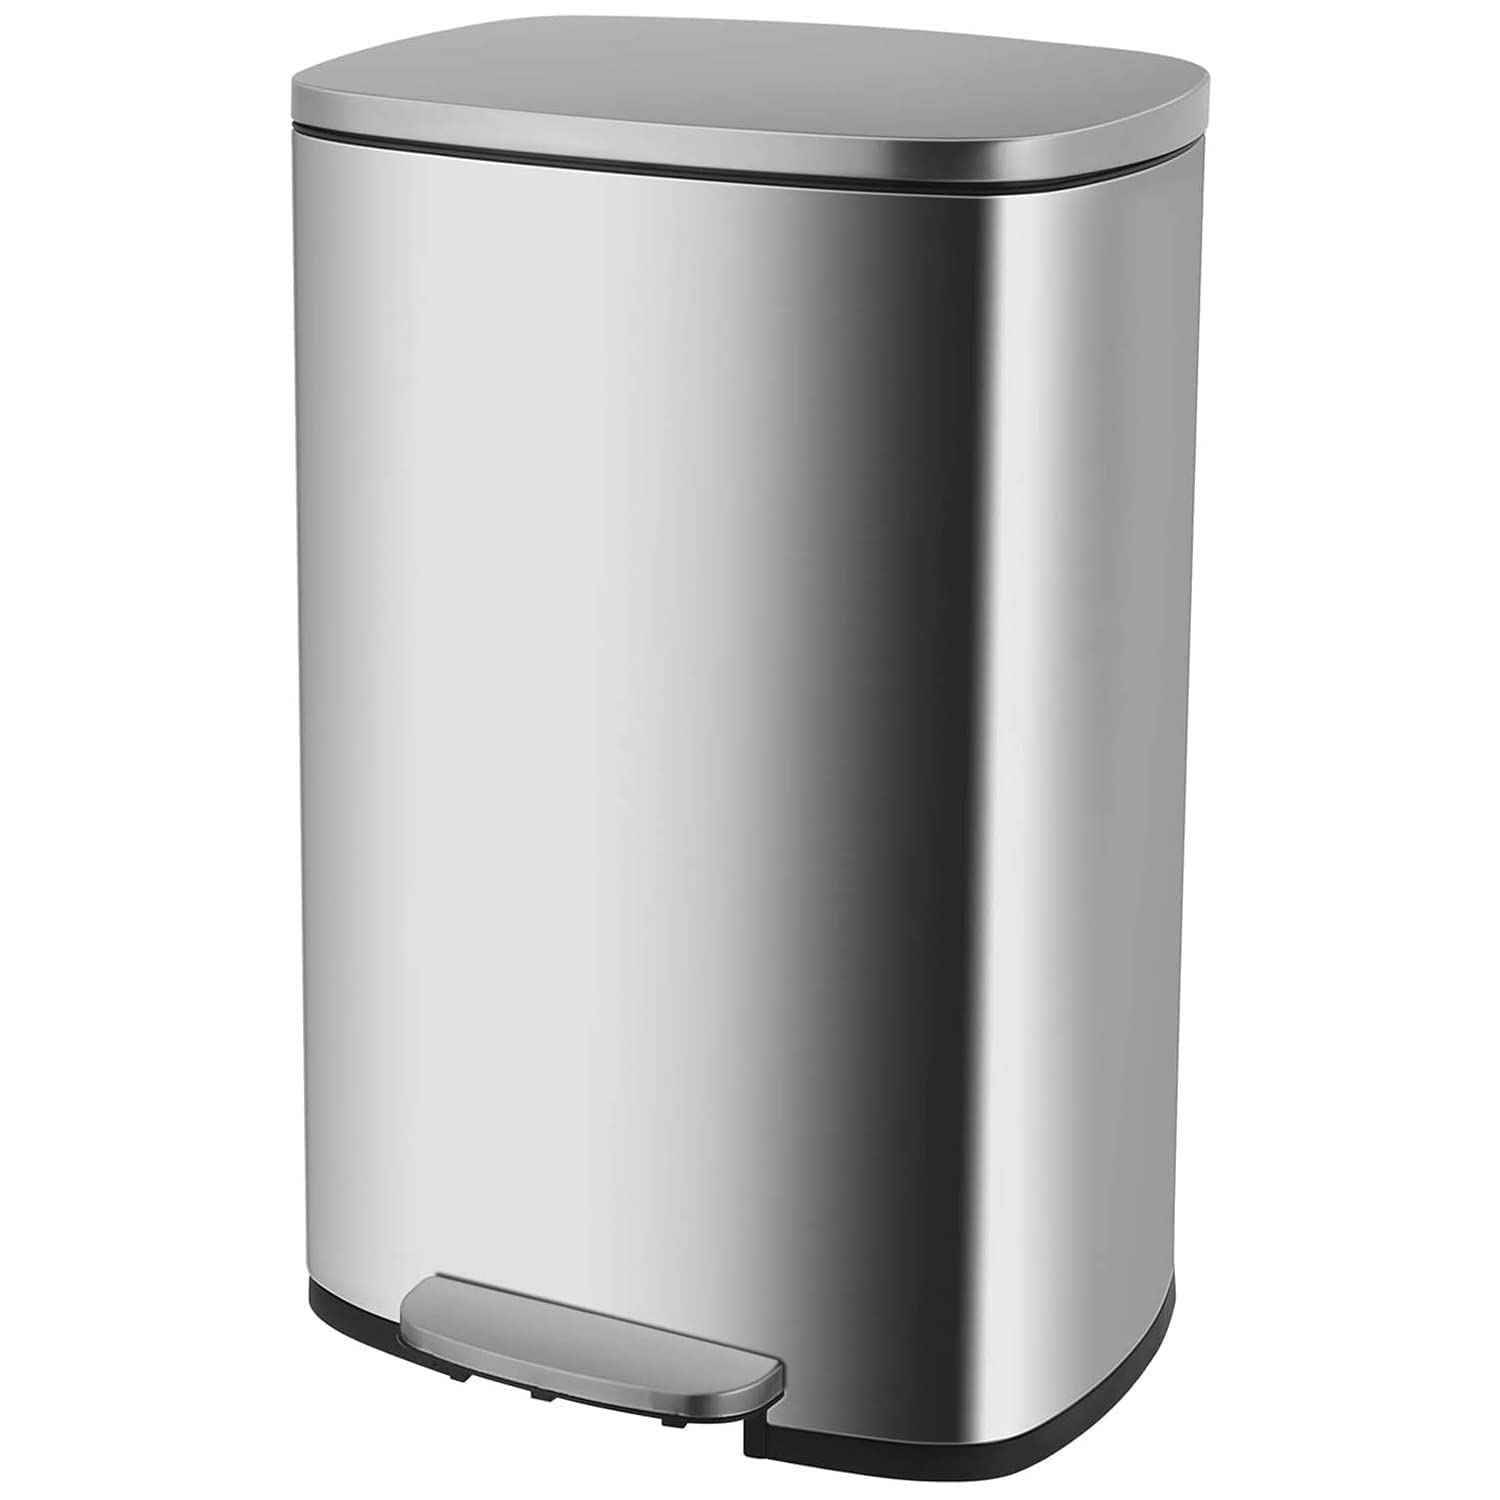 FDW 13 Gallon/50 Liter Gentle Open and Close for Kitchen Trash Can,Stainless Steel - image 1 of 7